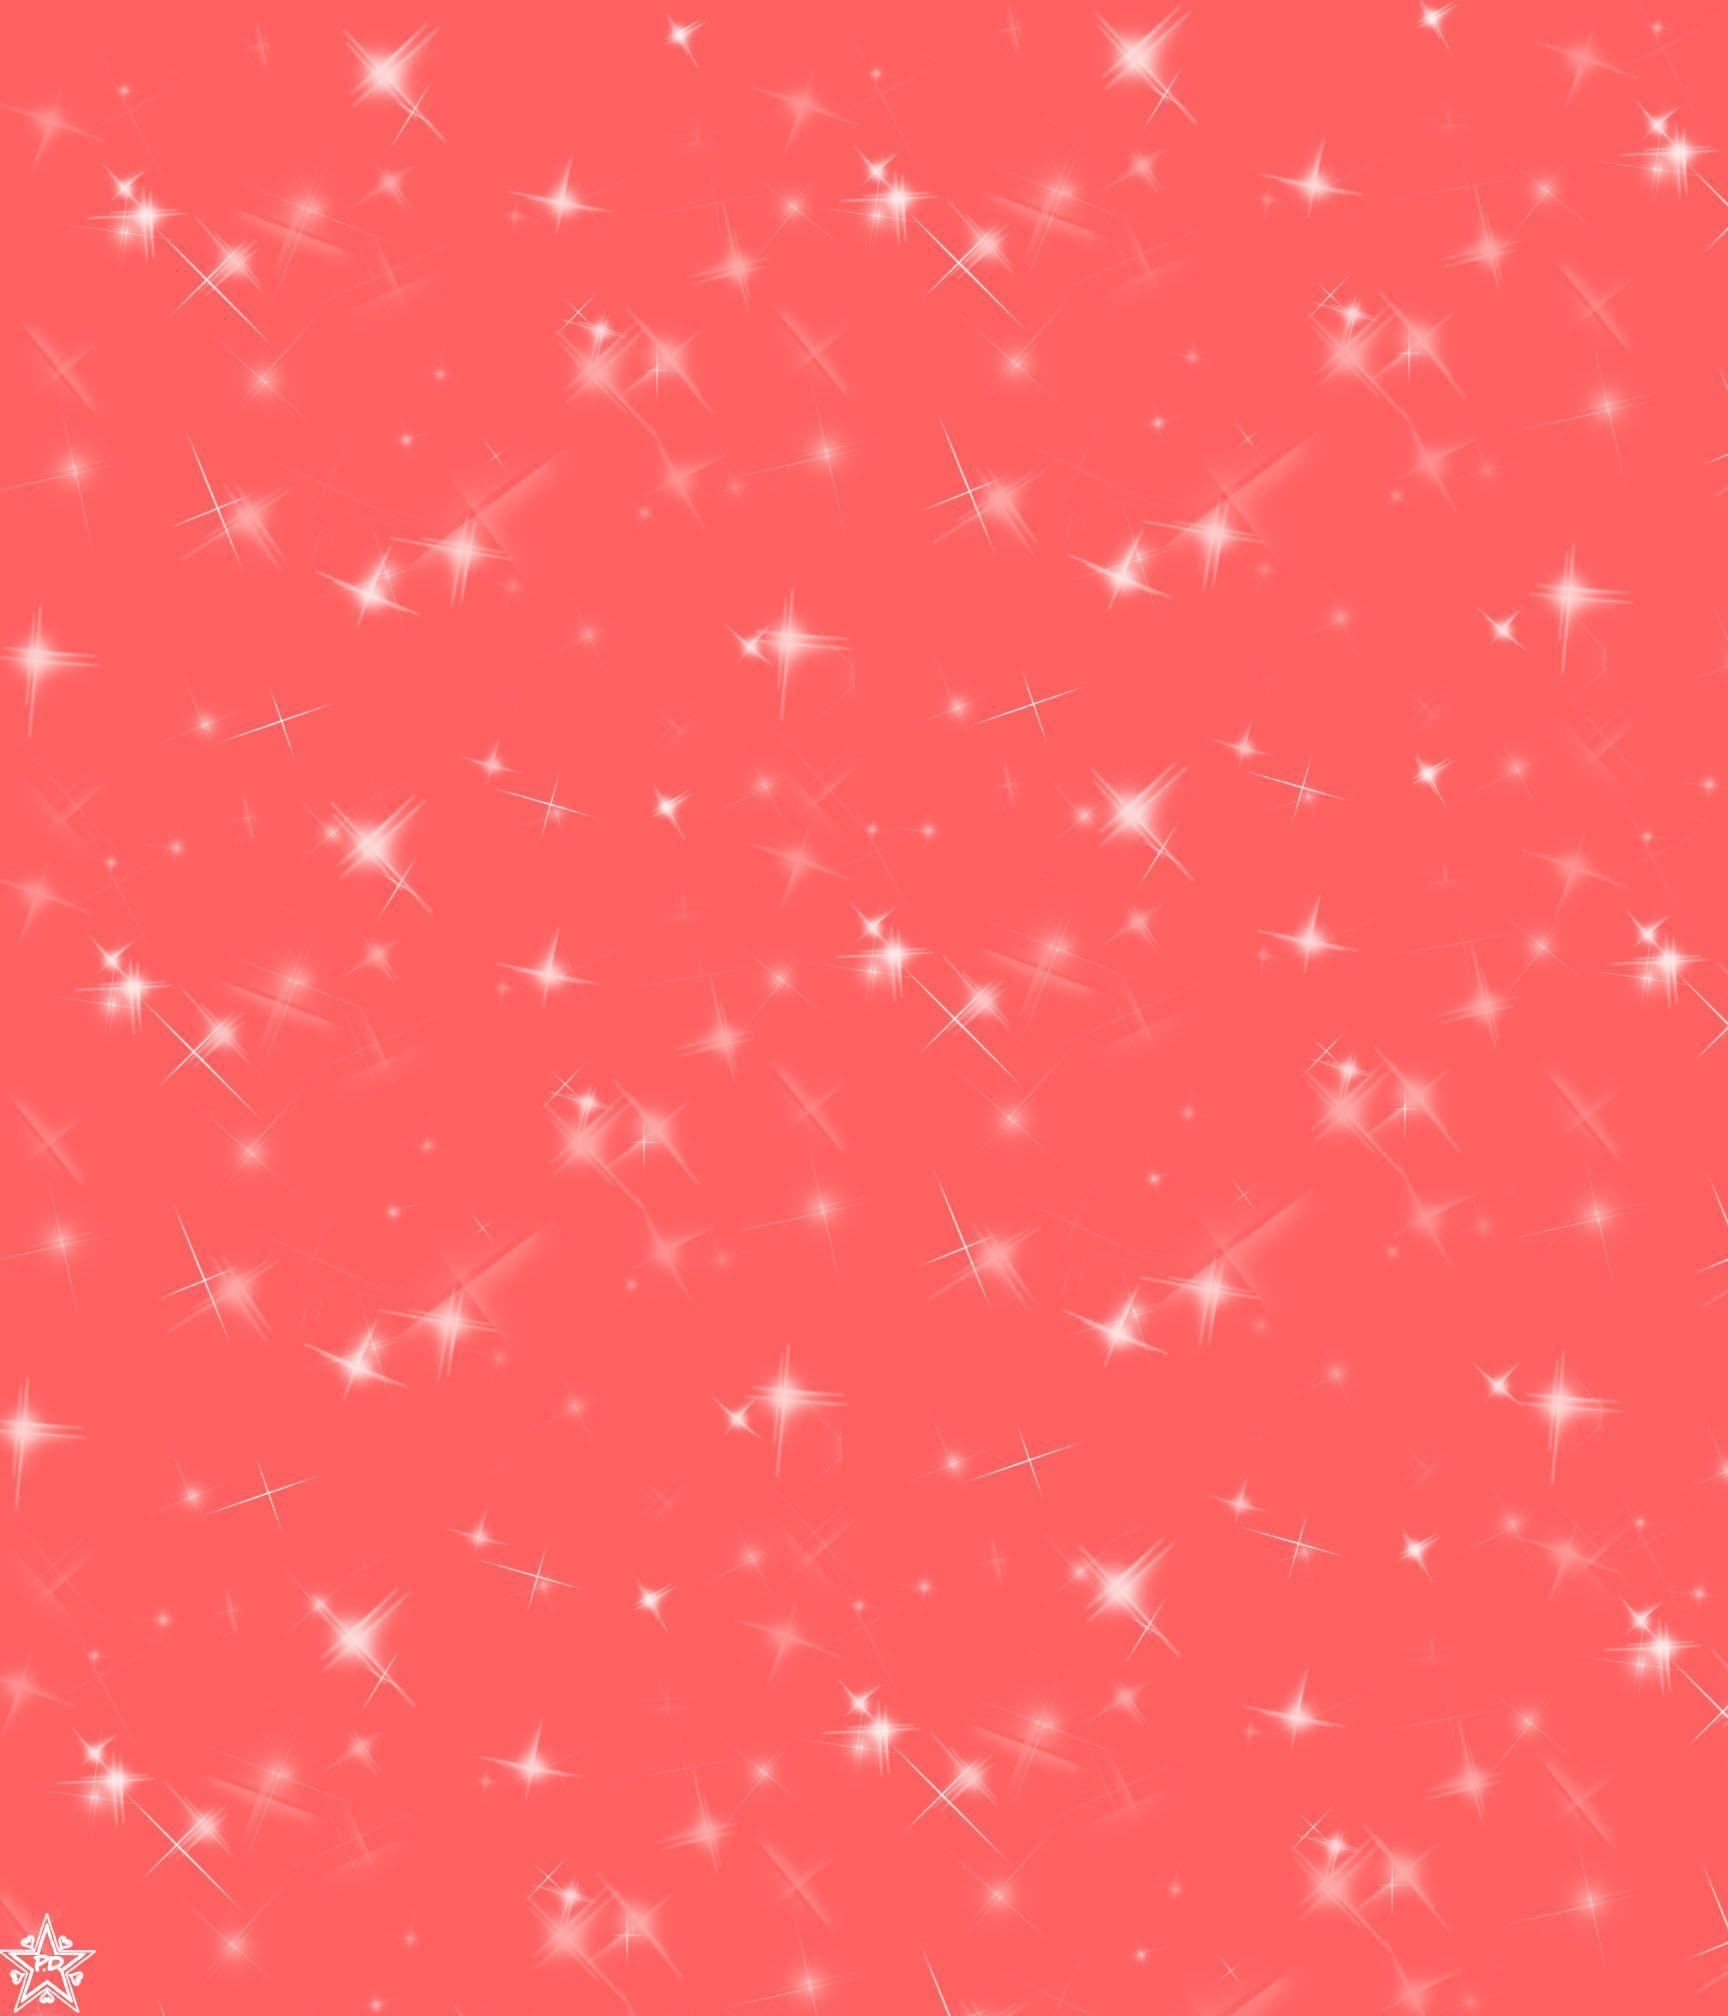 Red Sparkly Background